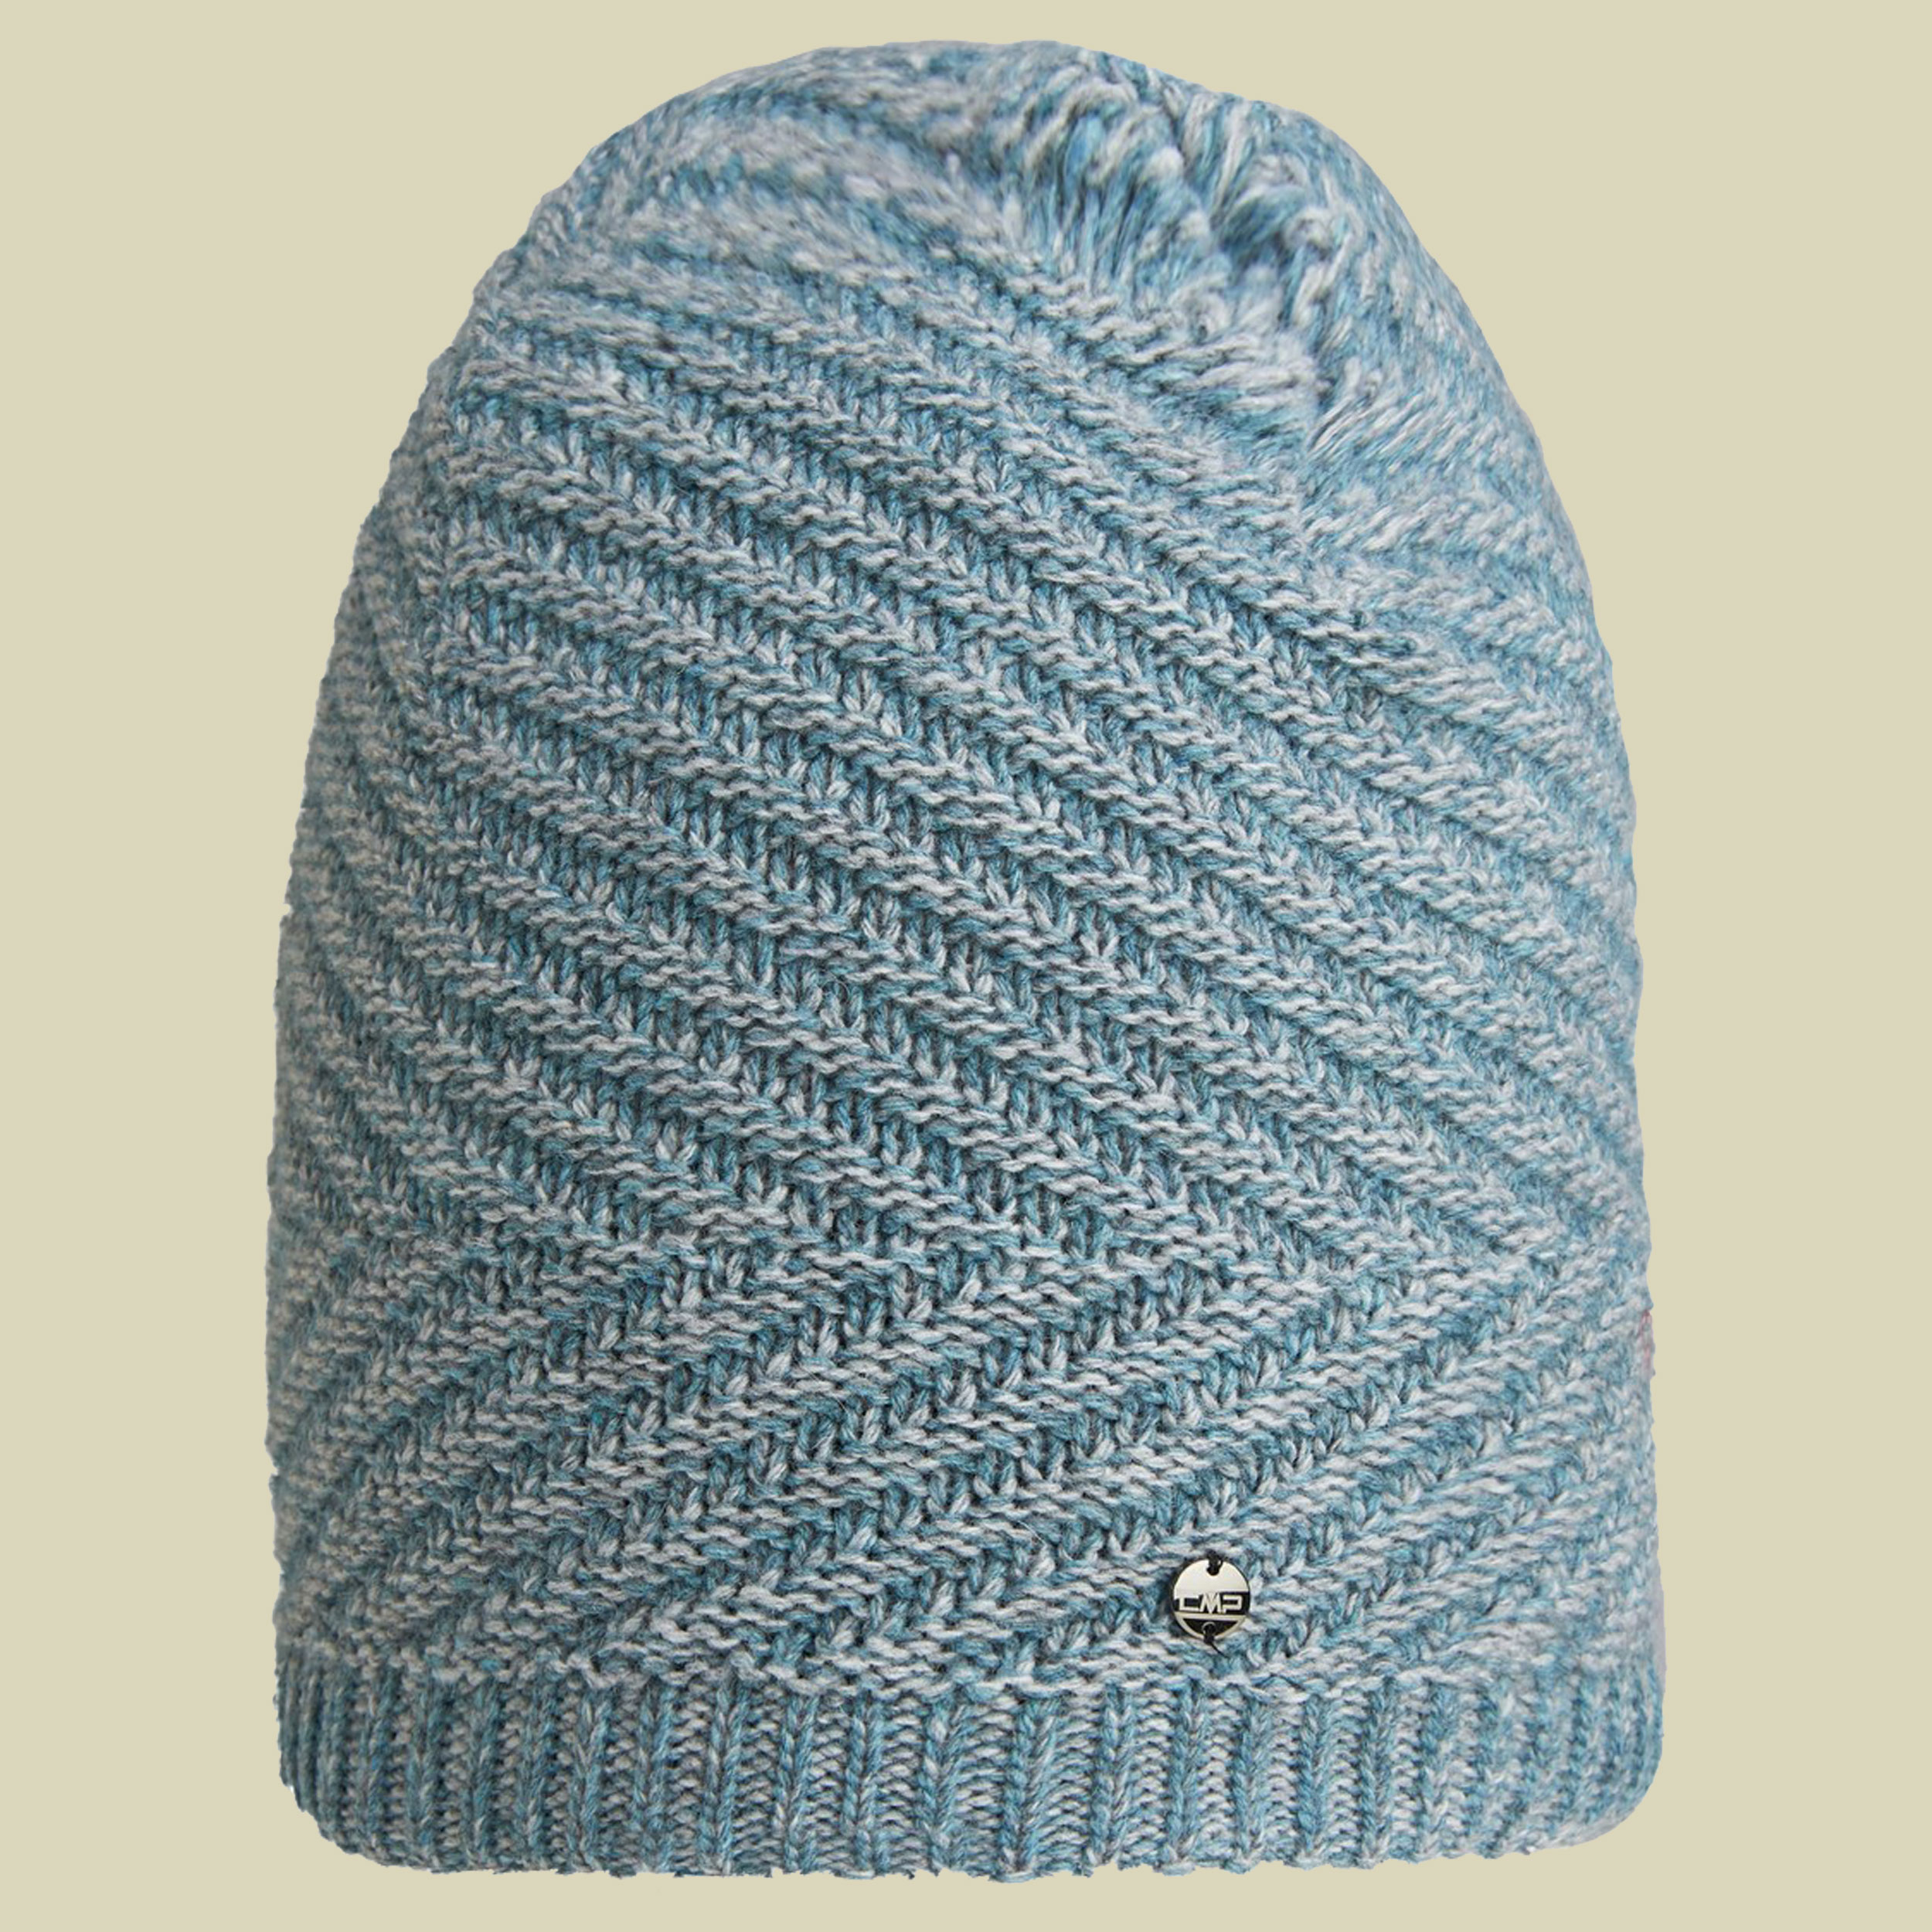 Woman Knitted Hat 5504569 Größe one size Farbe anice L568